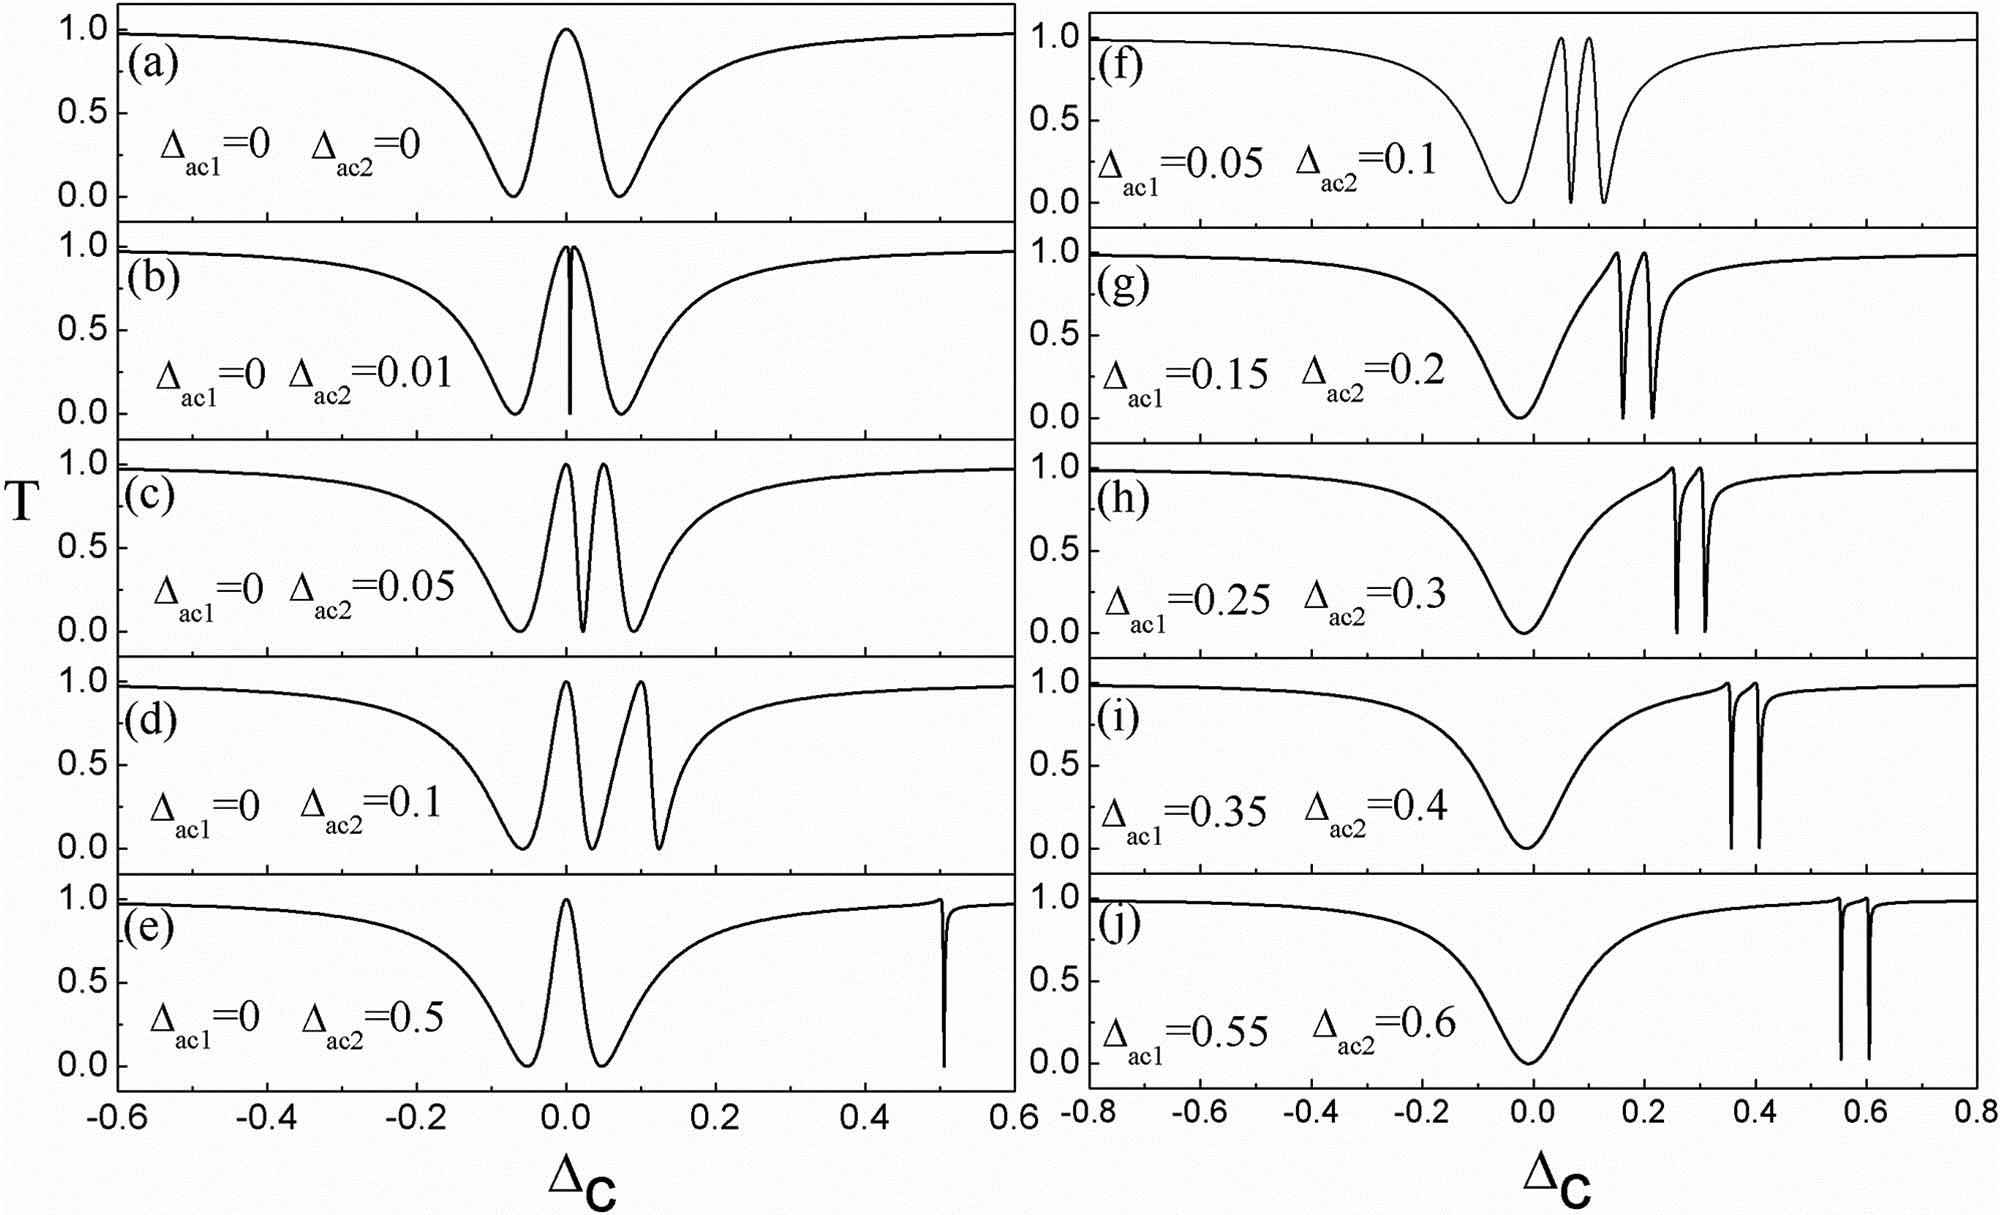 Single-photon transmission spectra for different atom–cavity detunings. (a)–(e) Δac1=0, and Δac2≠0. (f)–(j) Δac1≠0, and Δac2≠0. Other parameters: g0=0, λ1=λ2=0.05, γ2=γ3=0, Γ=0.1. All of the parameters are in units of Ω.